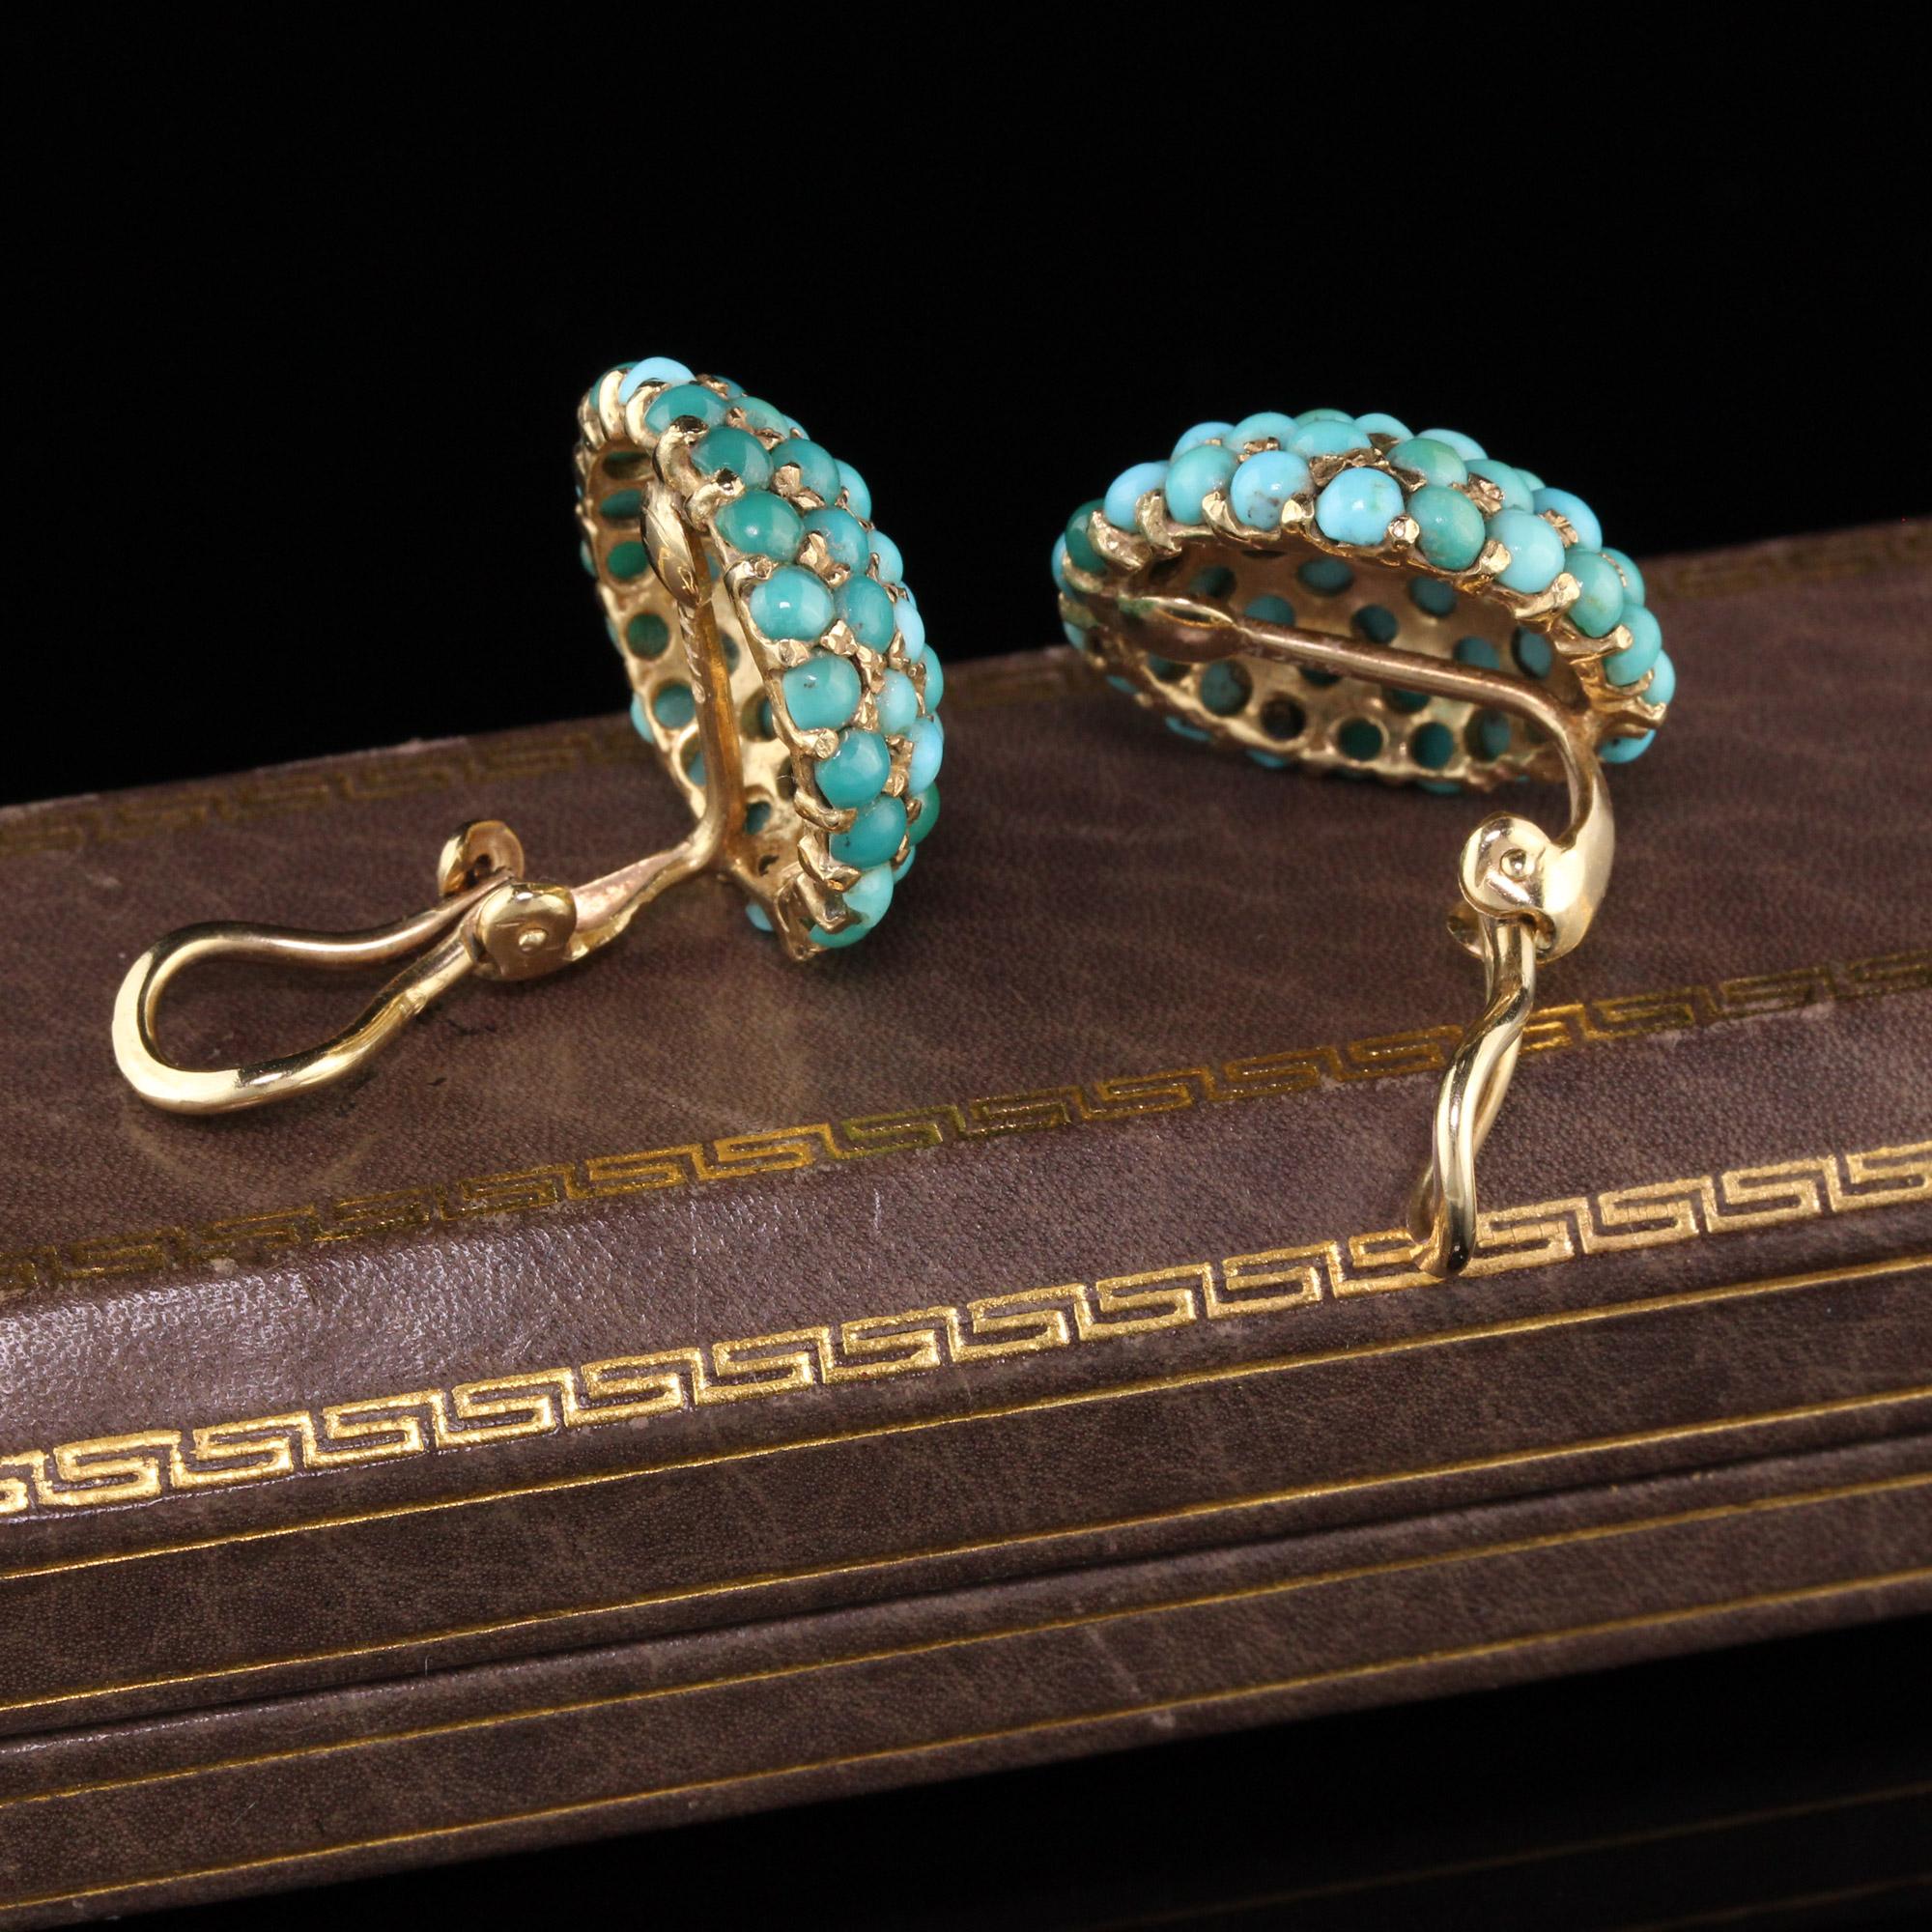 Gorgeous Vintage earrings with turquoise stones all over.

Item #E0017

Metal: 14K Yellow Gold

Weight: 8.9 Grams

Measurements: 18.6 x 19.1 mm